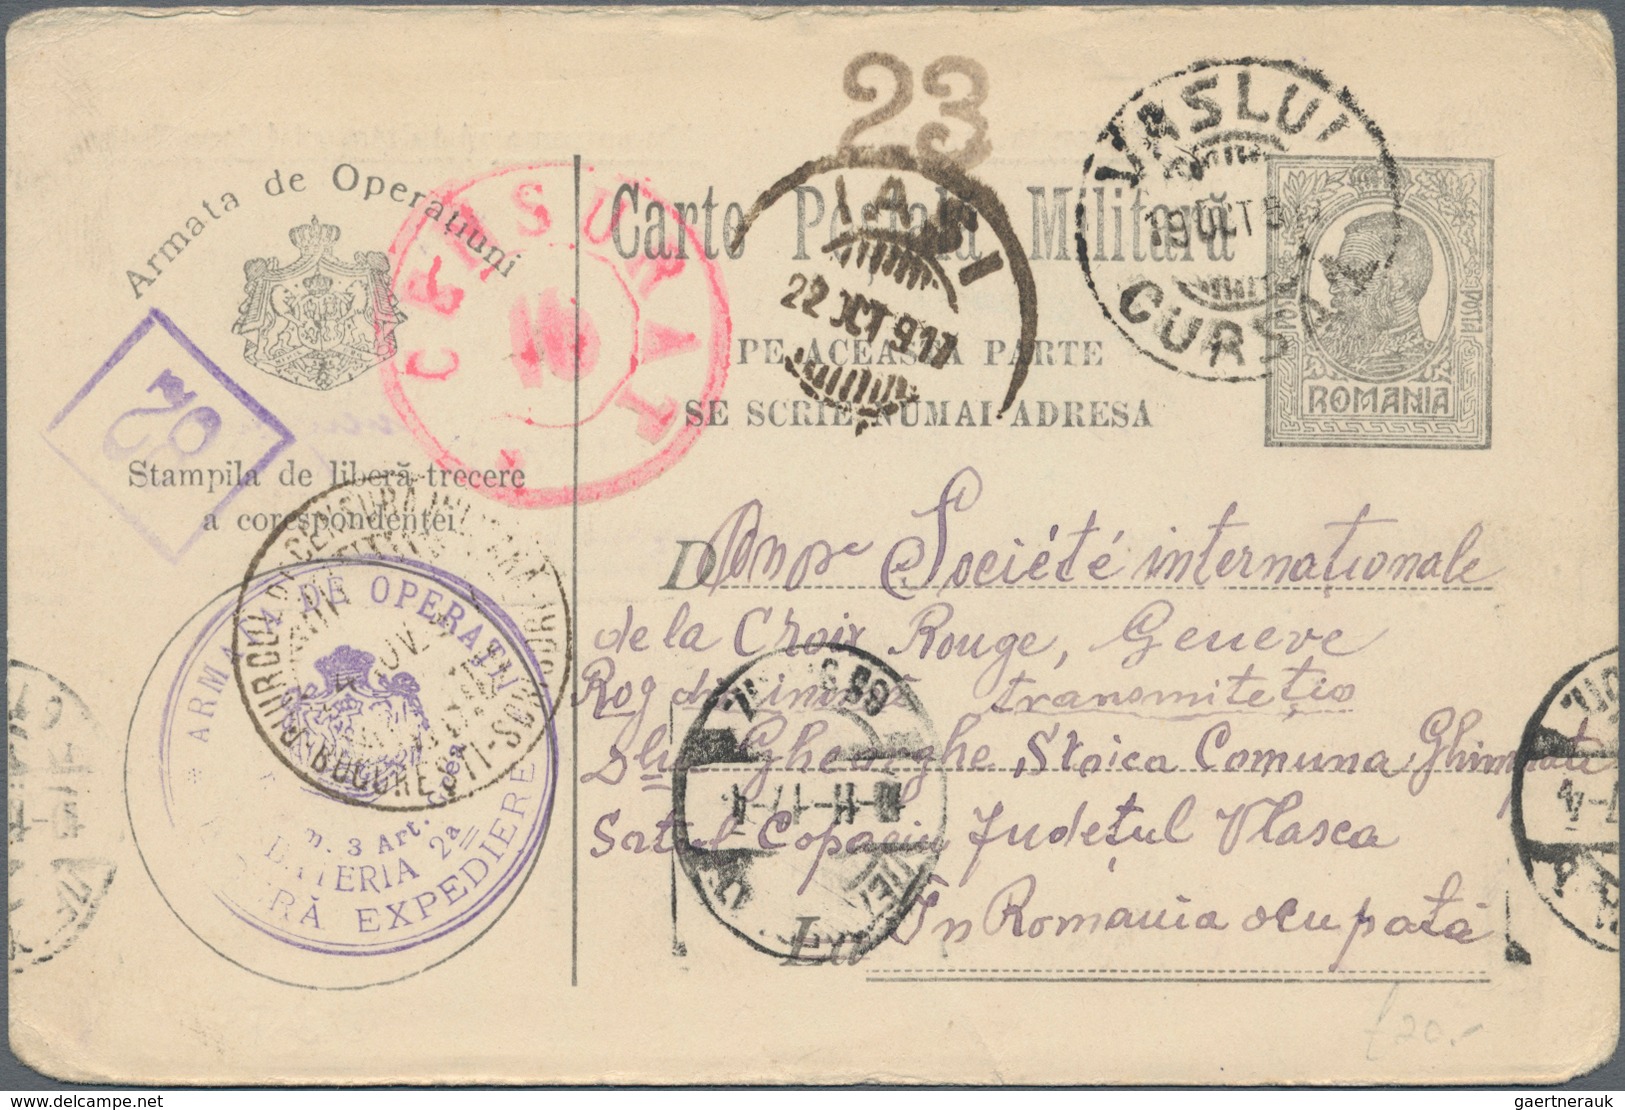 Rumänien - Ganzsachen: 1890/1980 (ca.),accumulation of approx. 600 unused and used postal stationery